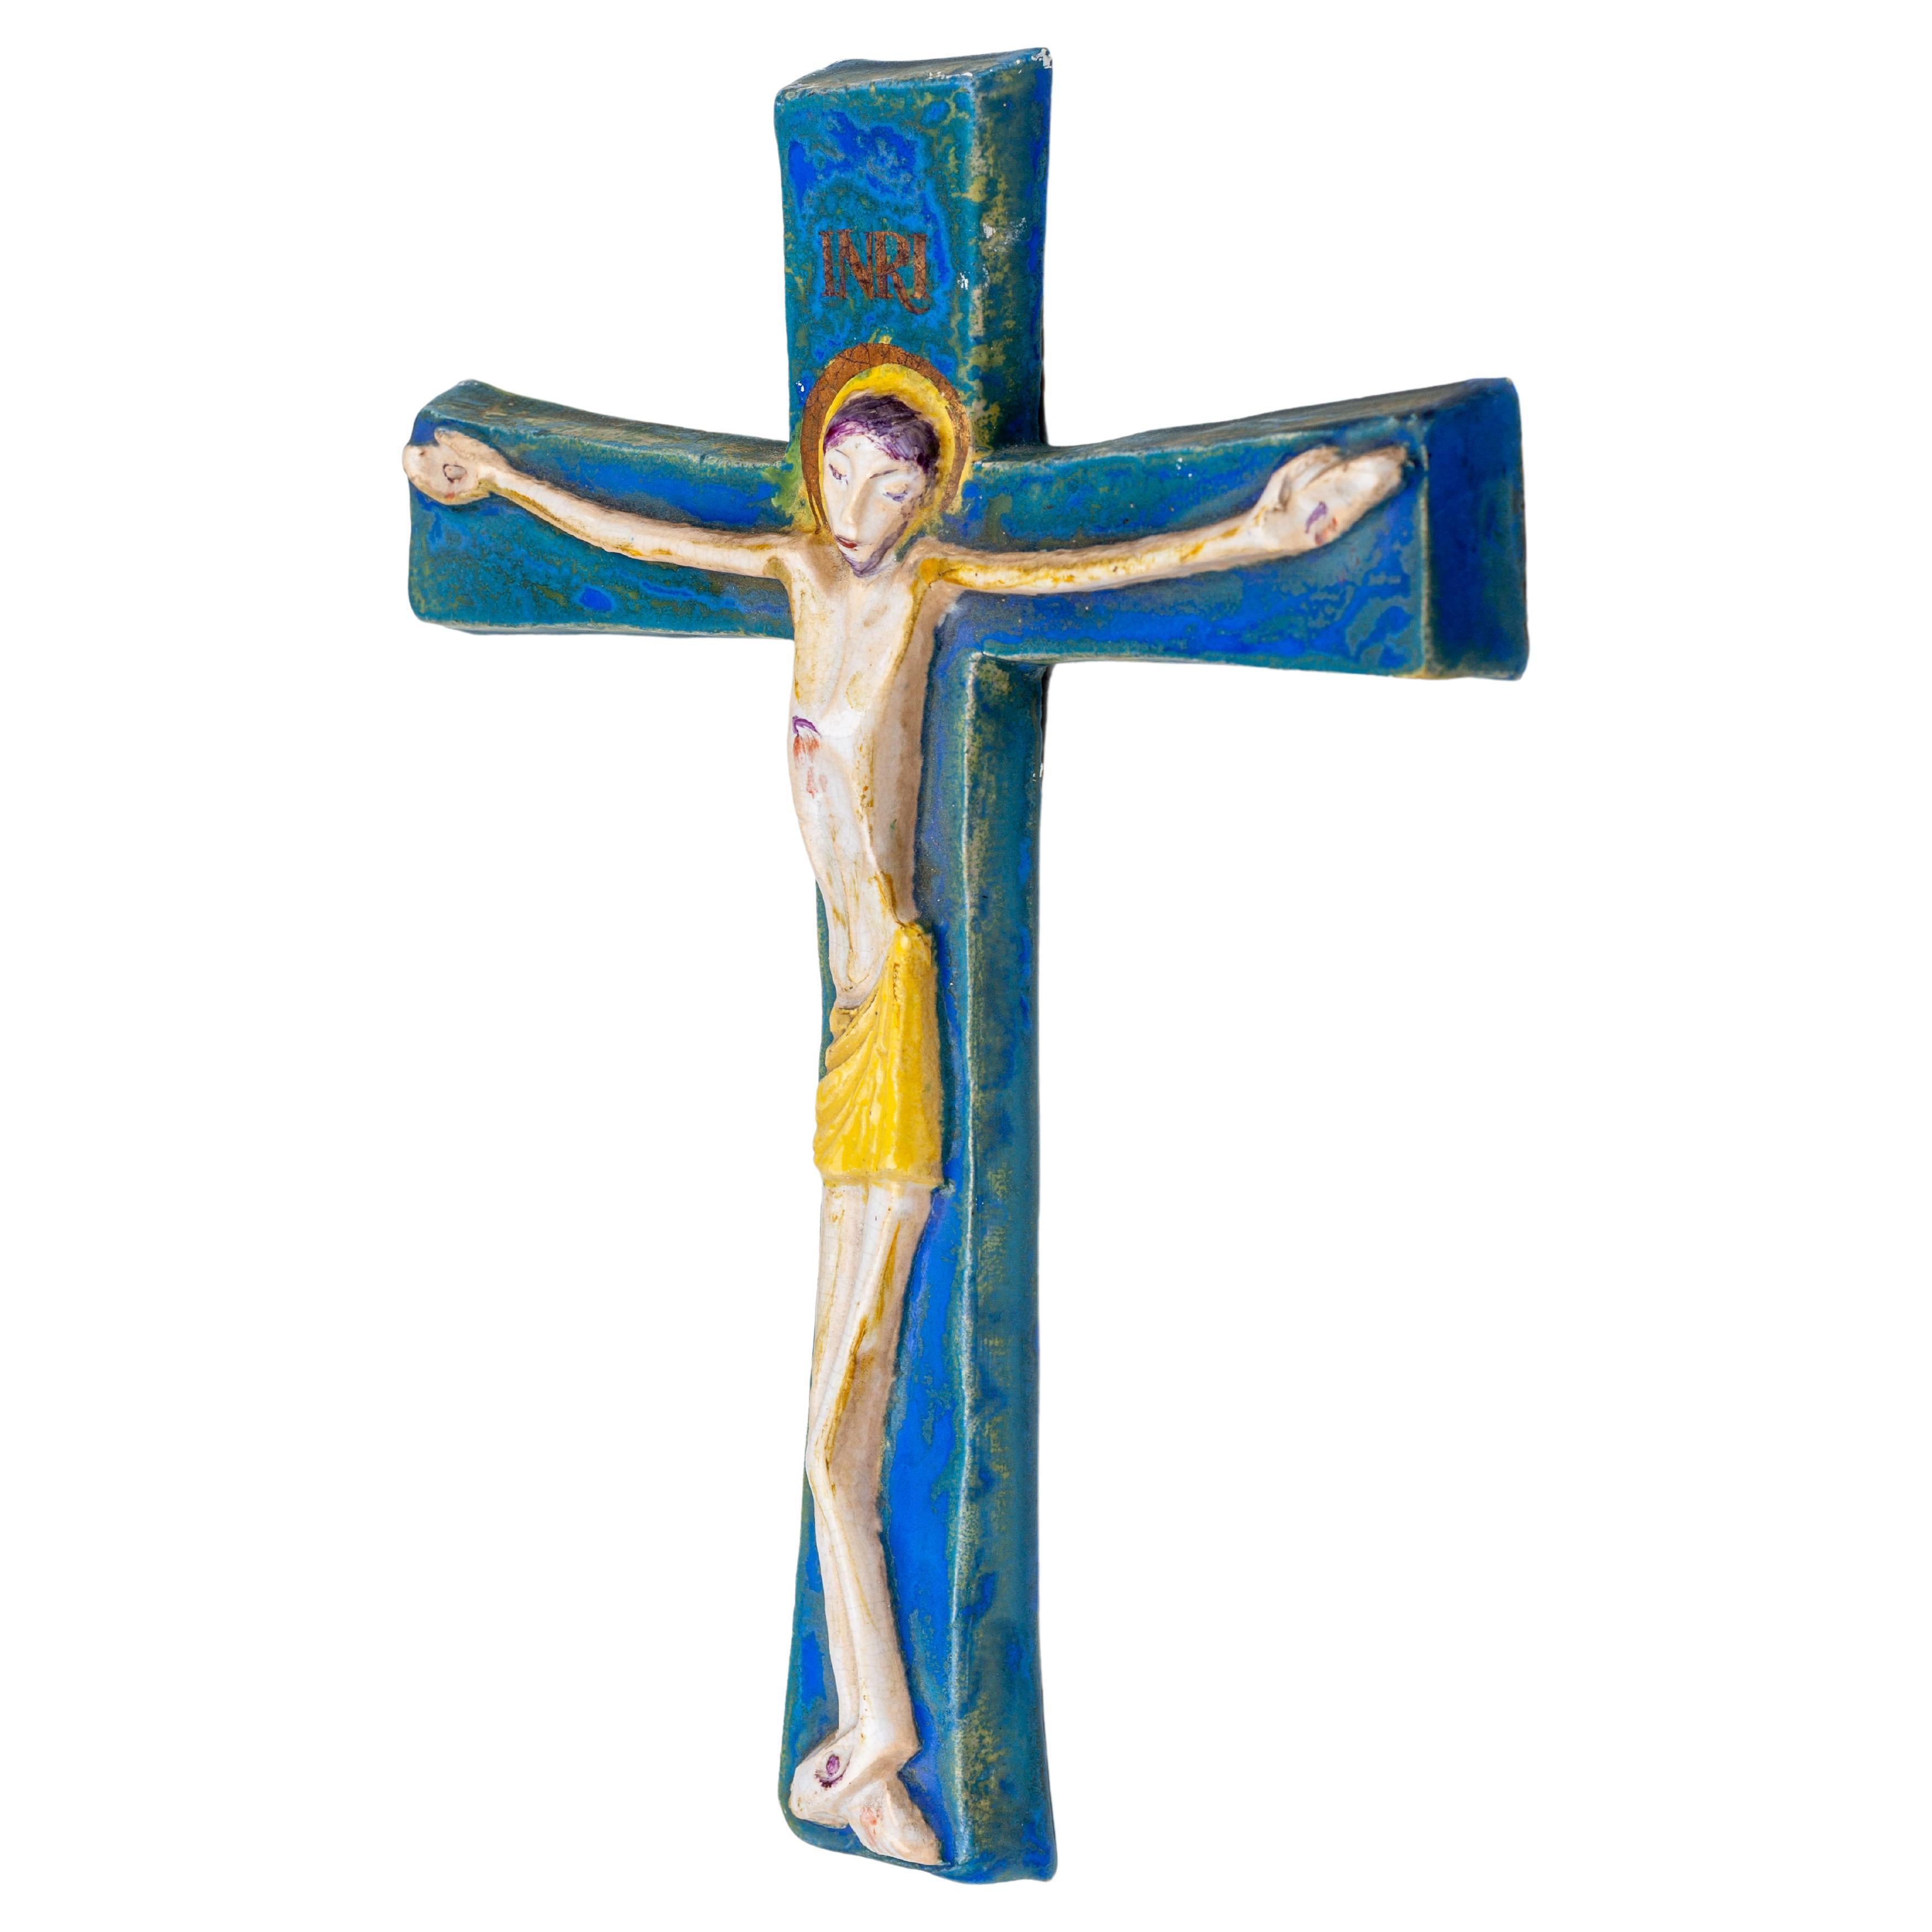 Modernist Cobalt Blue and Gold Wall Cross - European Studio Pottery Masterpiece For Sale